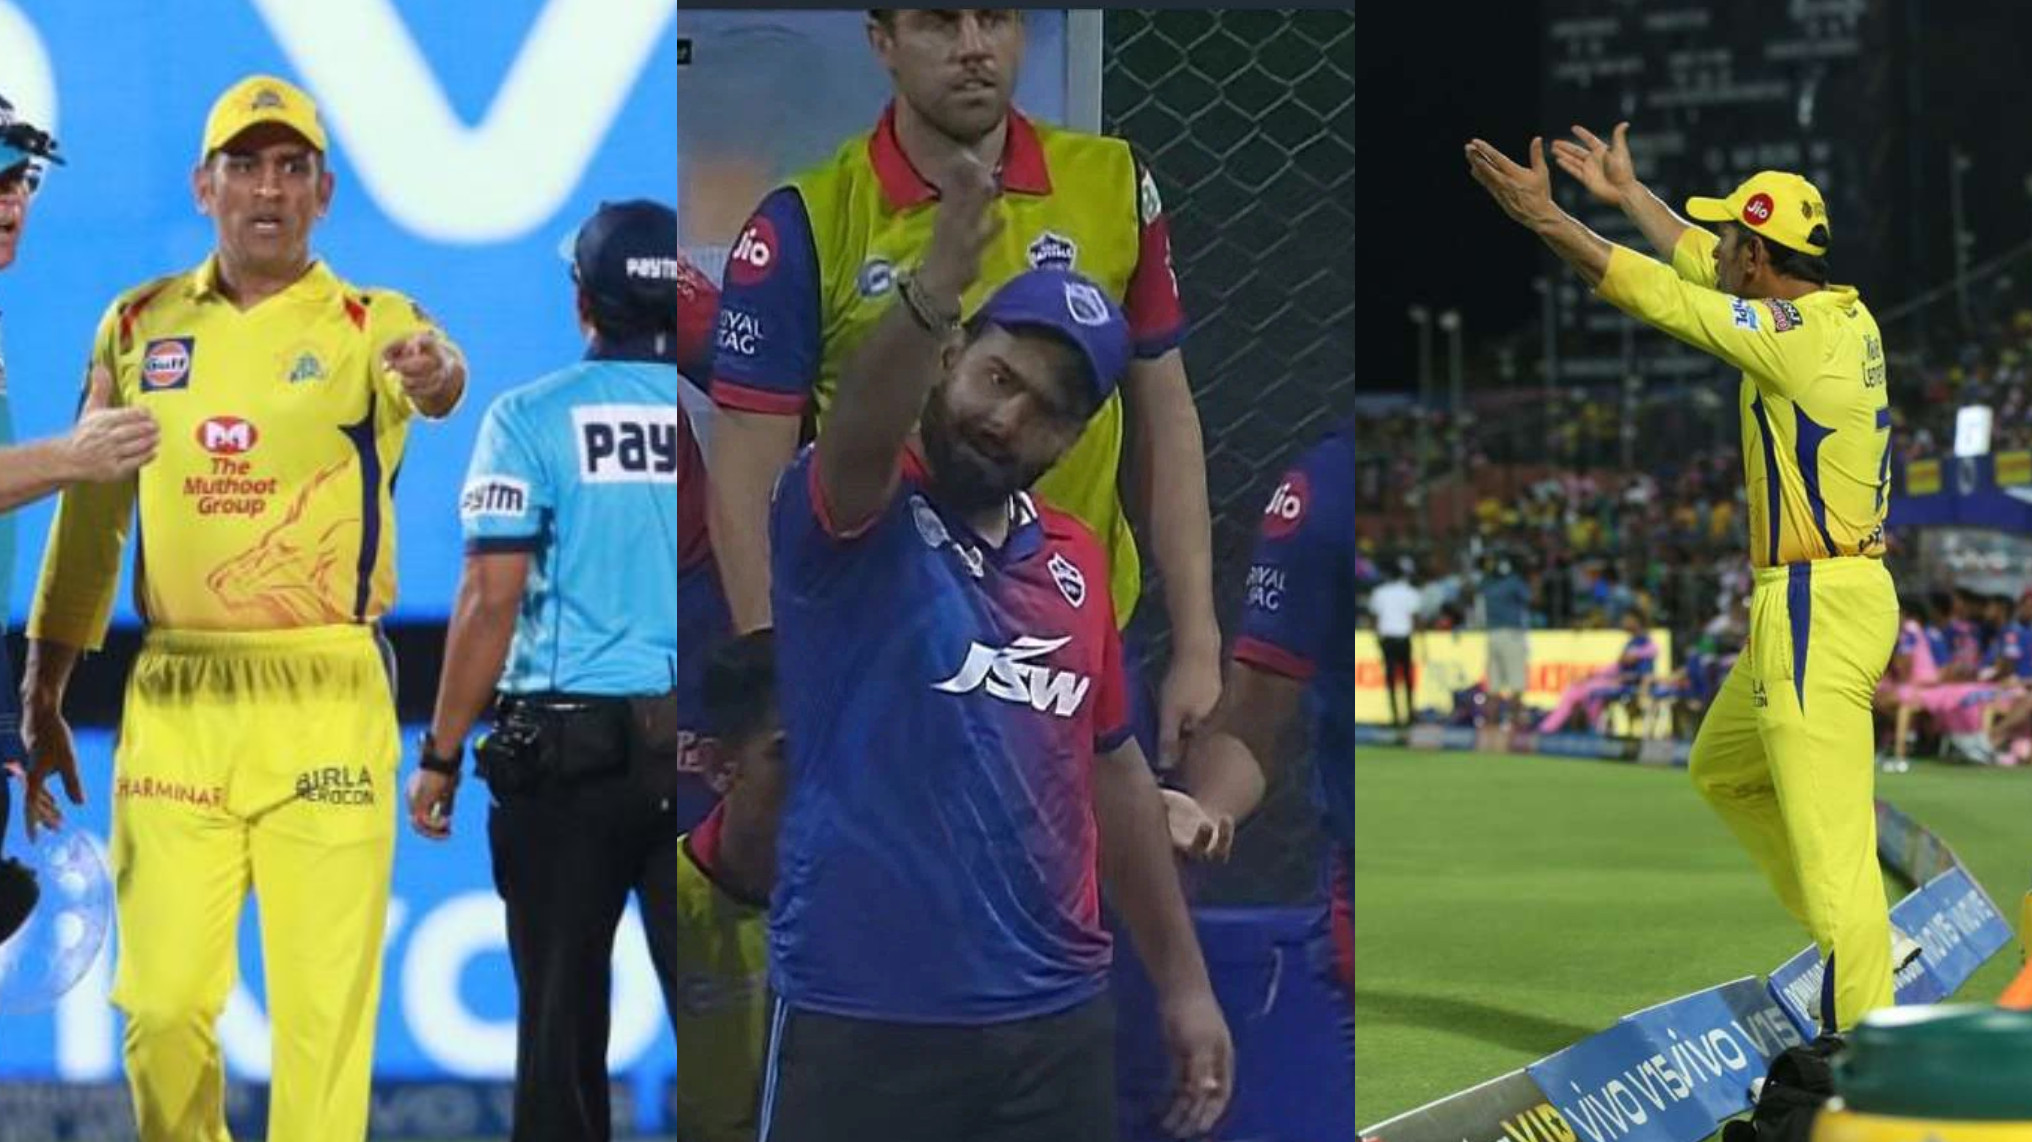 IPL 2022: Twitterati reminded of angry MS Dhoni’s fight with umpires after Rishabh Pant’s antics vs RR